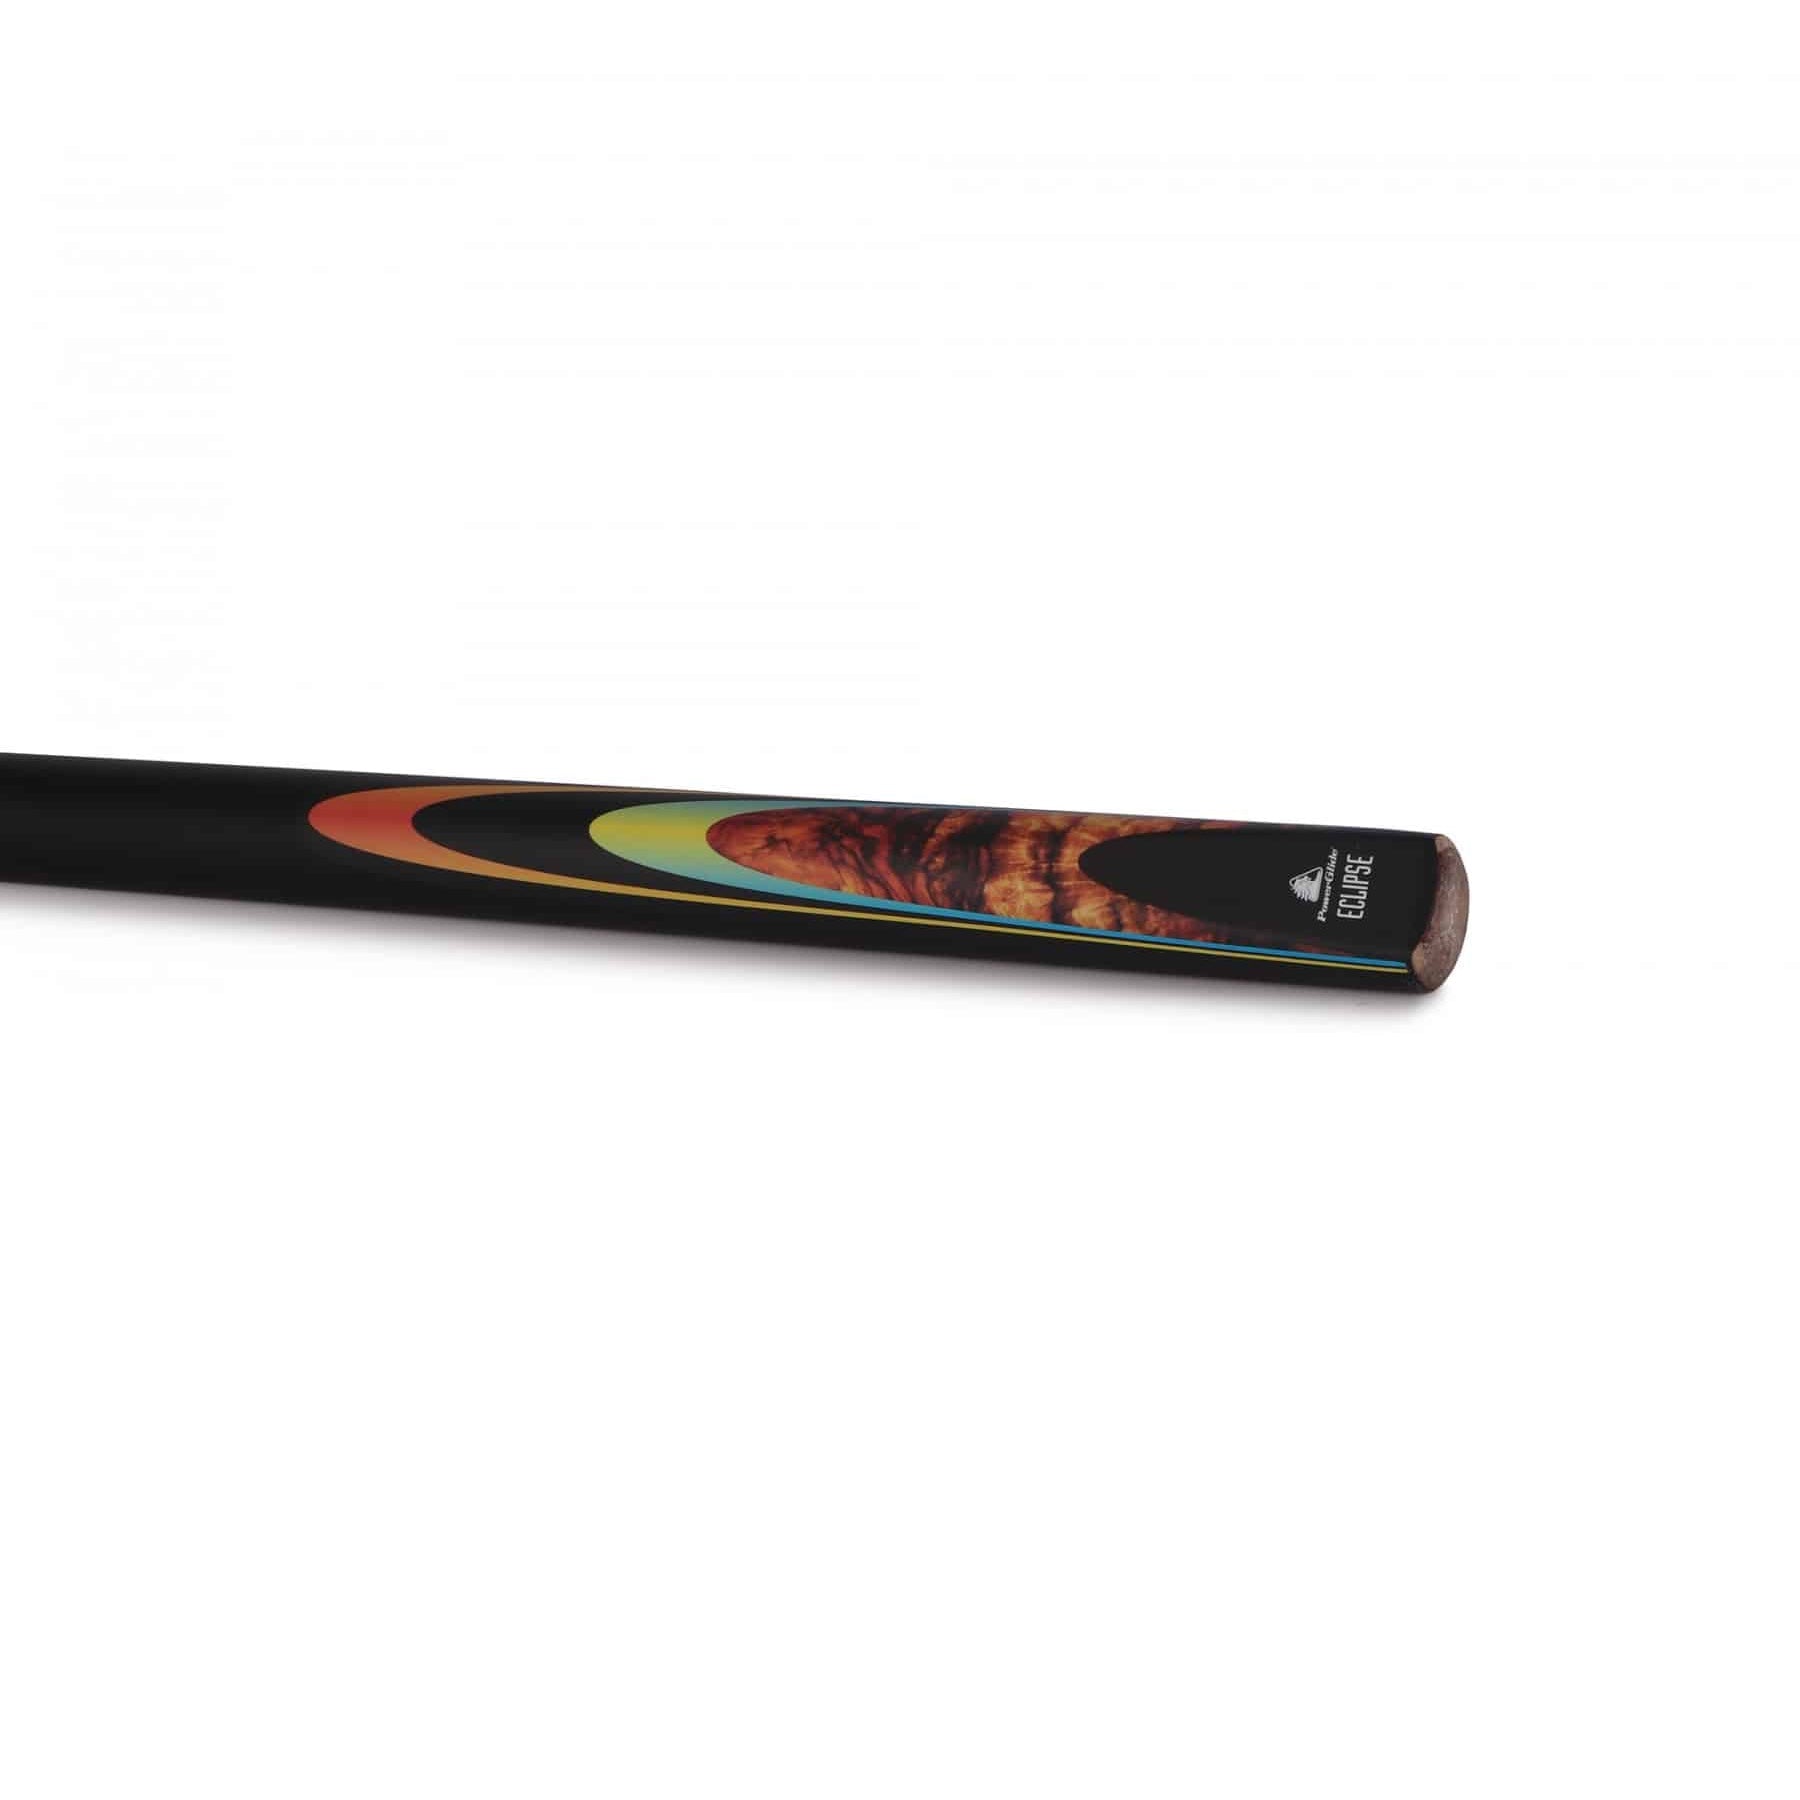 Powerglide Eclipse Centre Jointed Snooker Cue